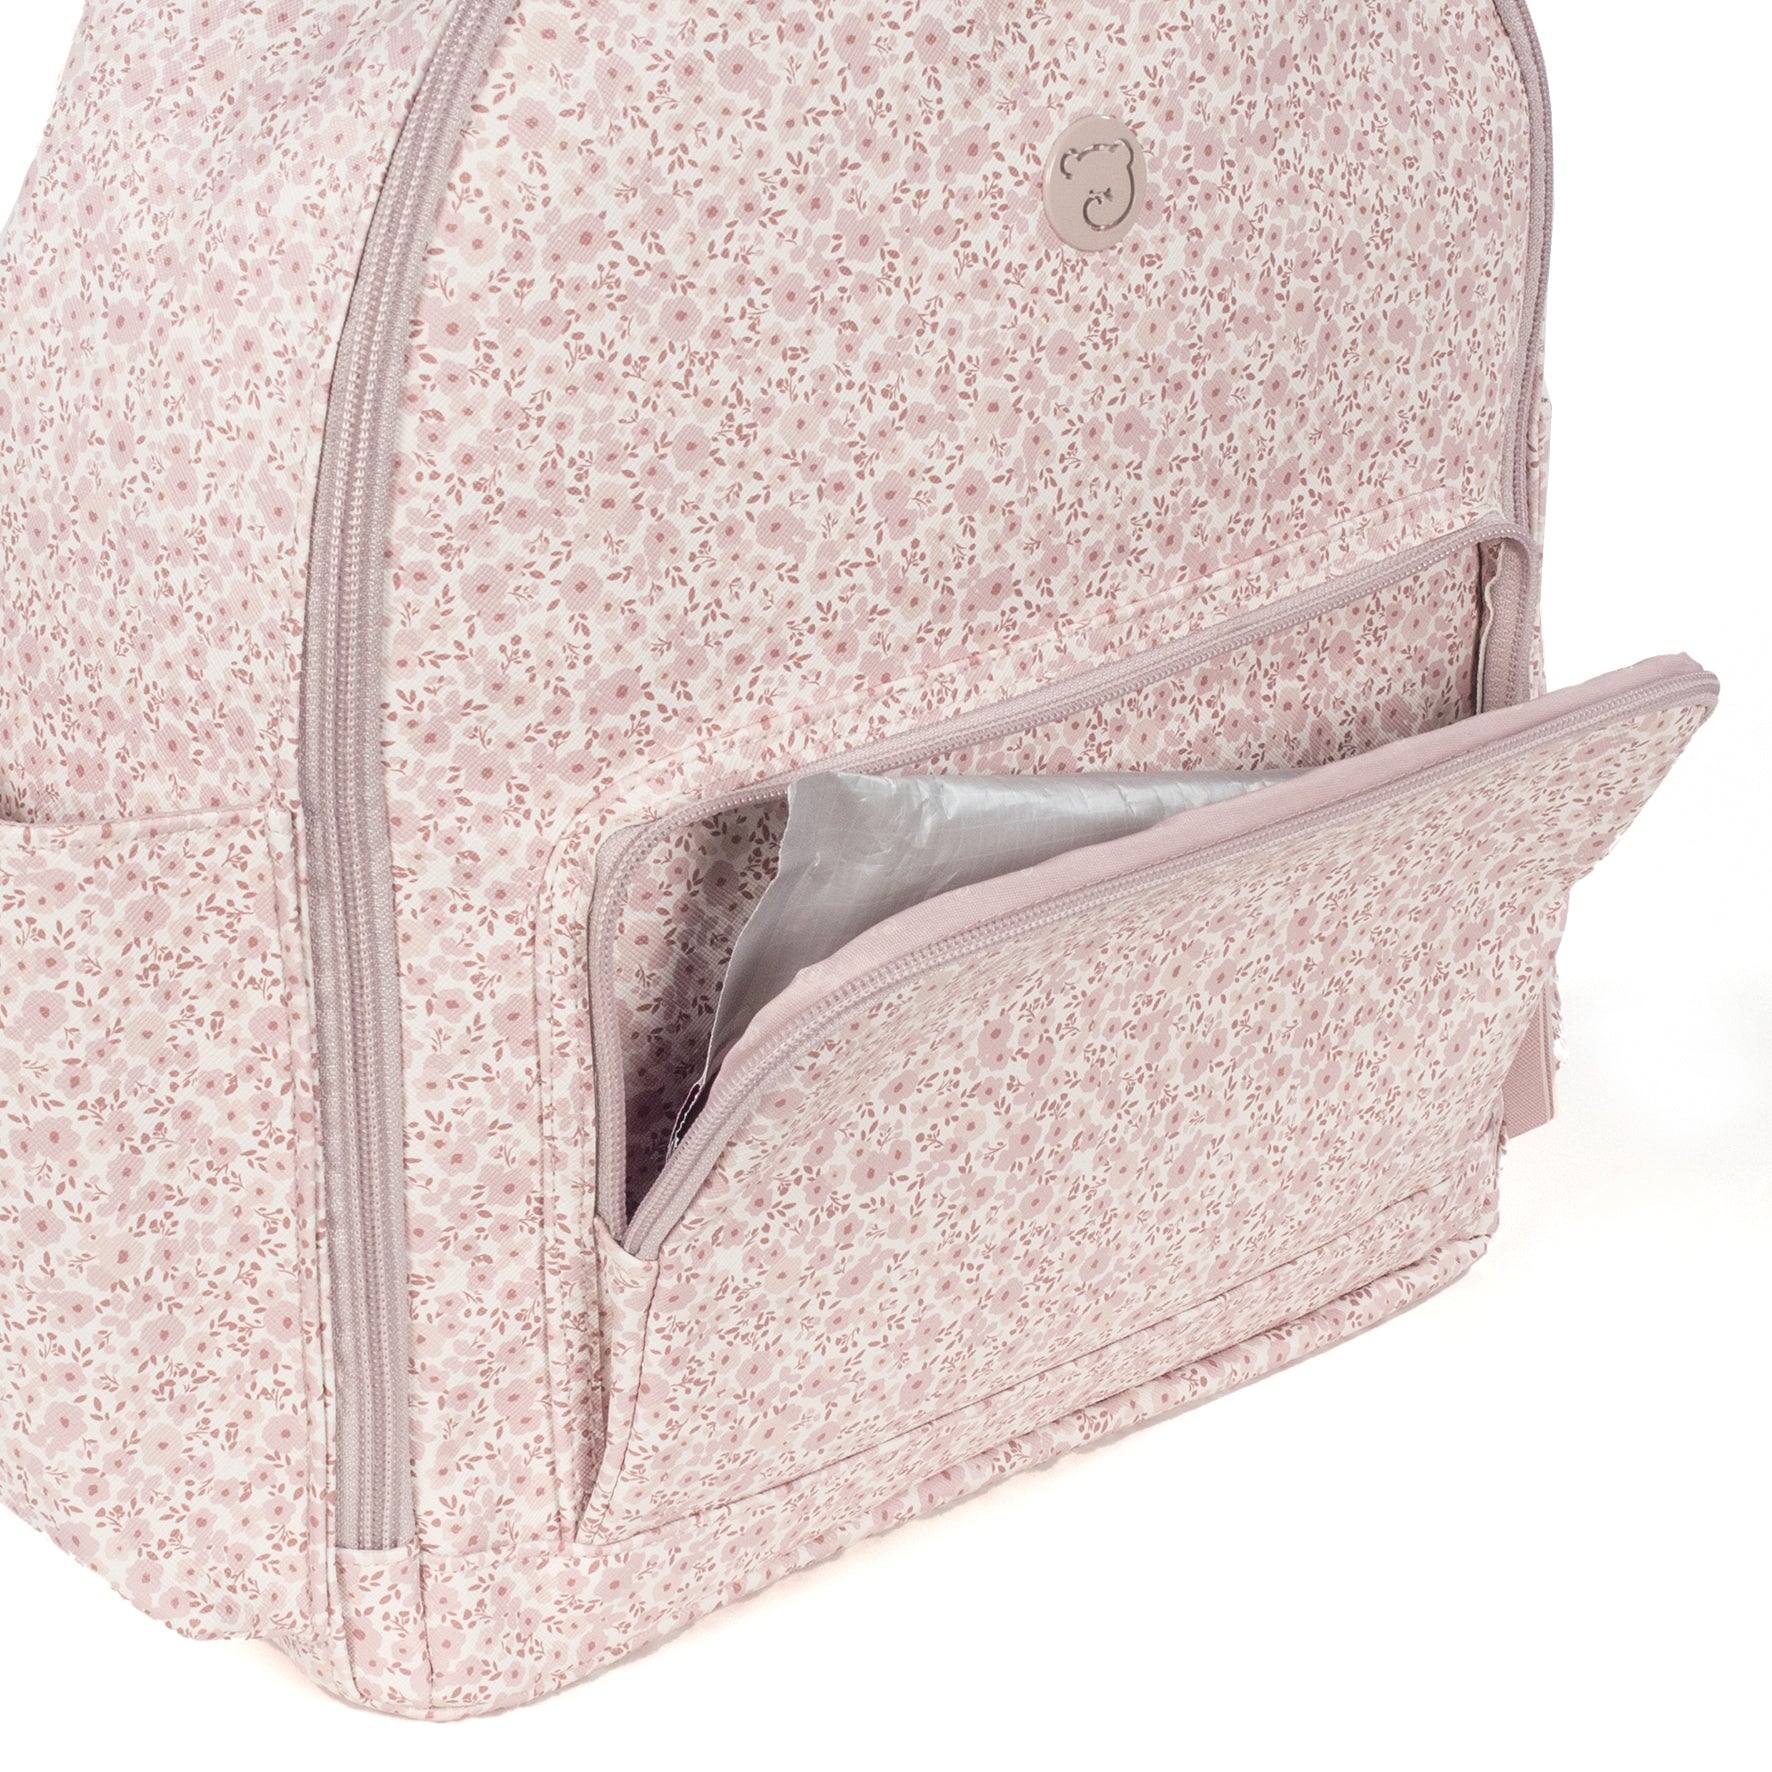 Pasito a Pasito Flower Mellow Pink Backpack Diaper Changing Bag